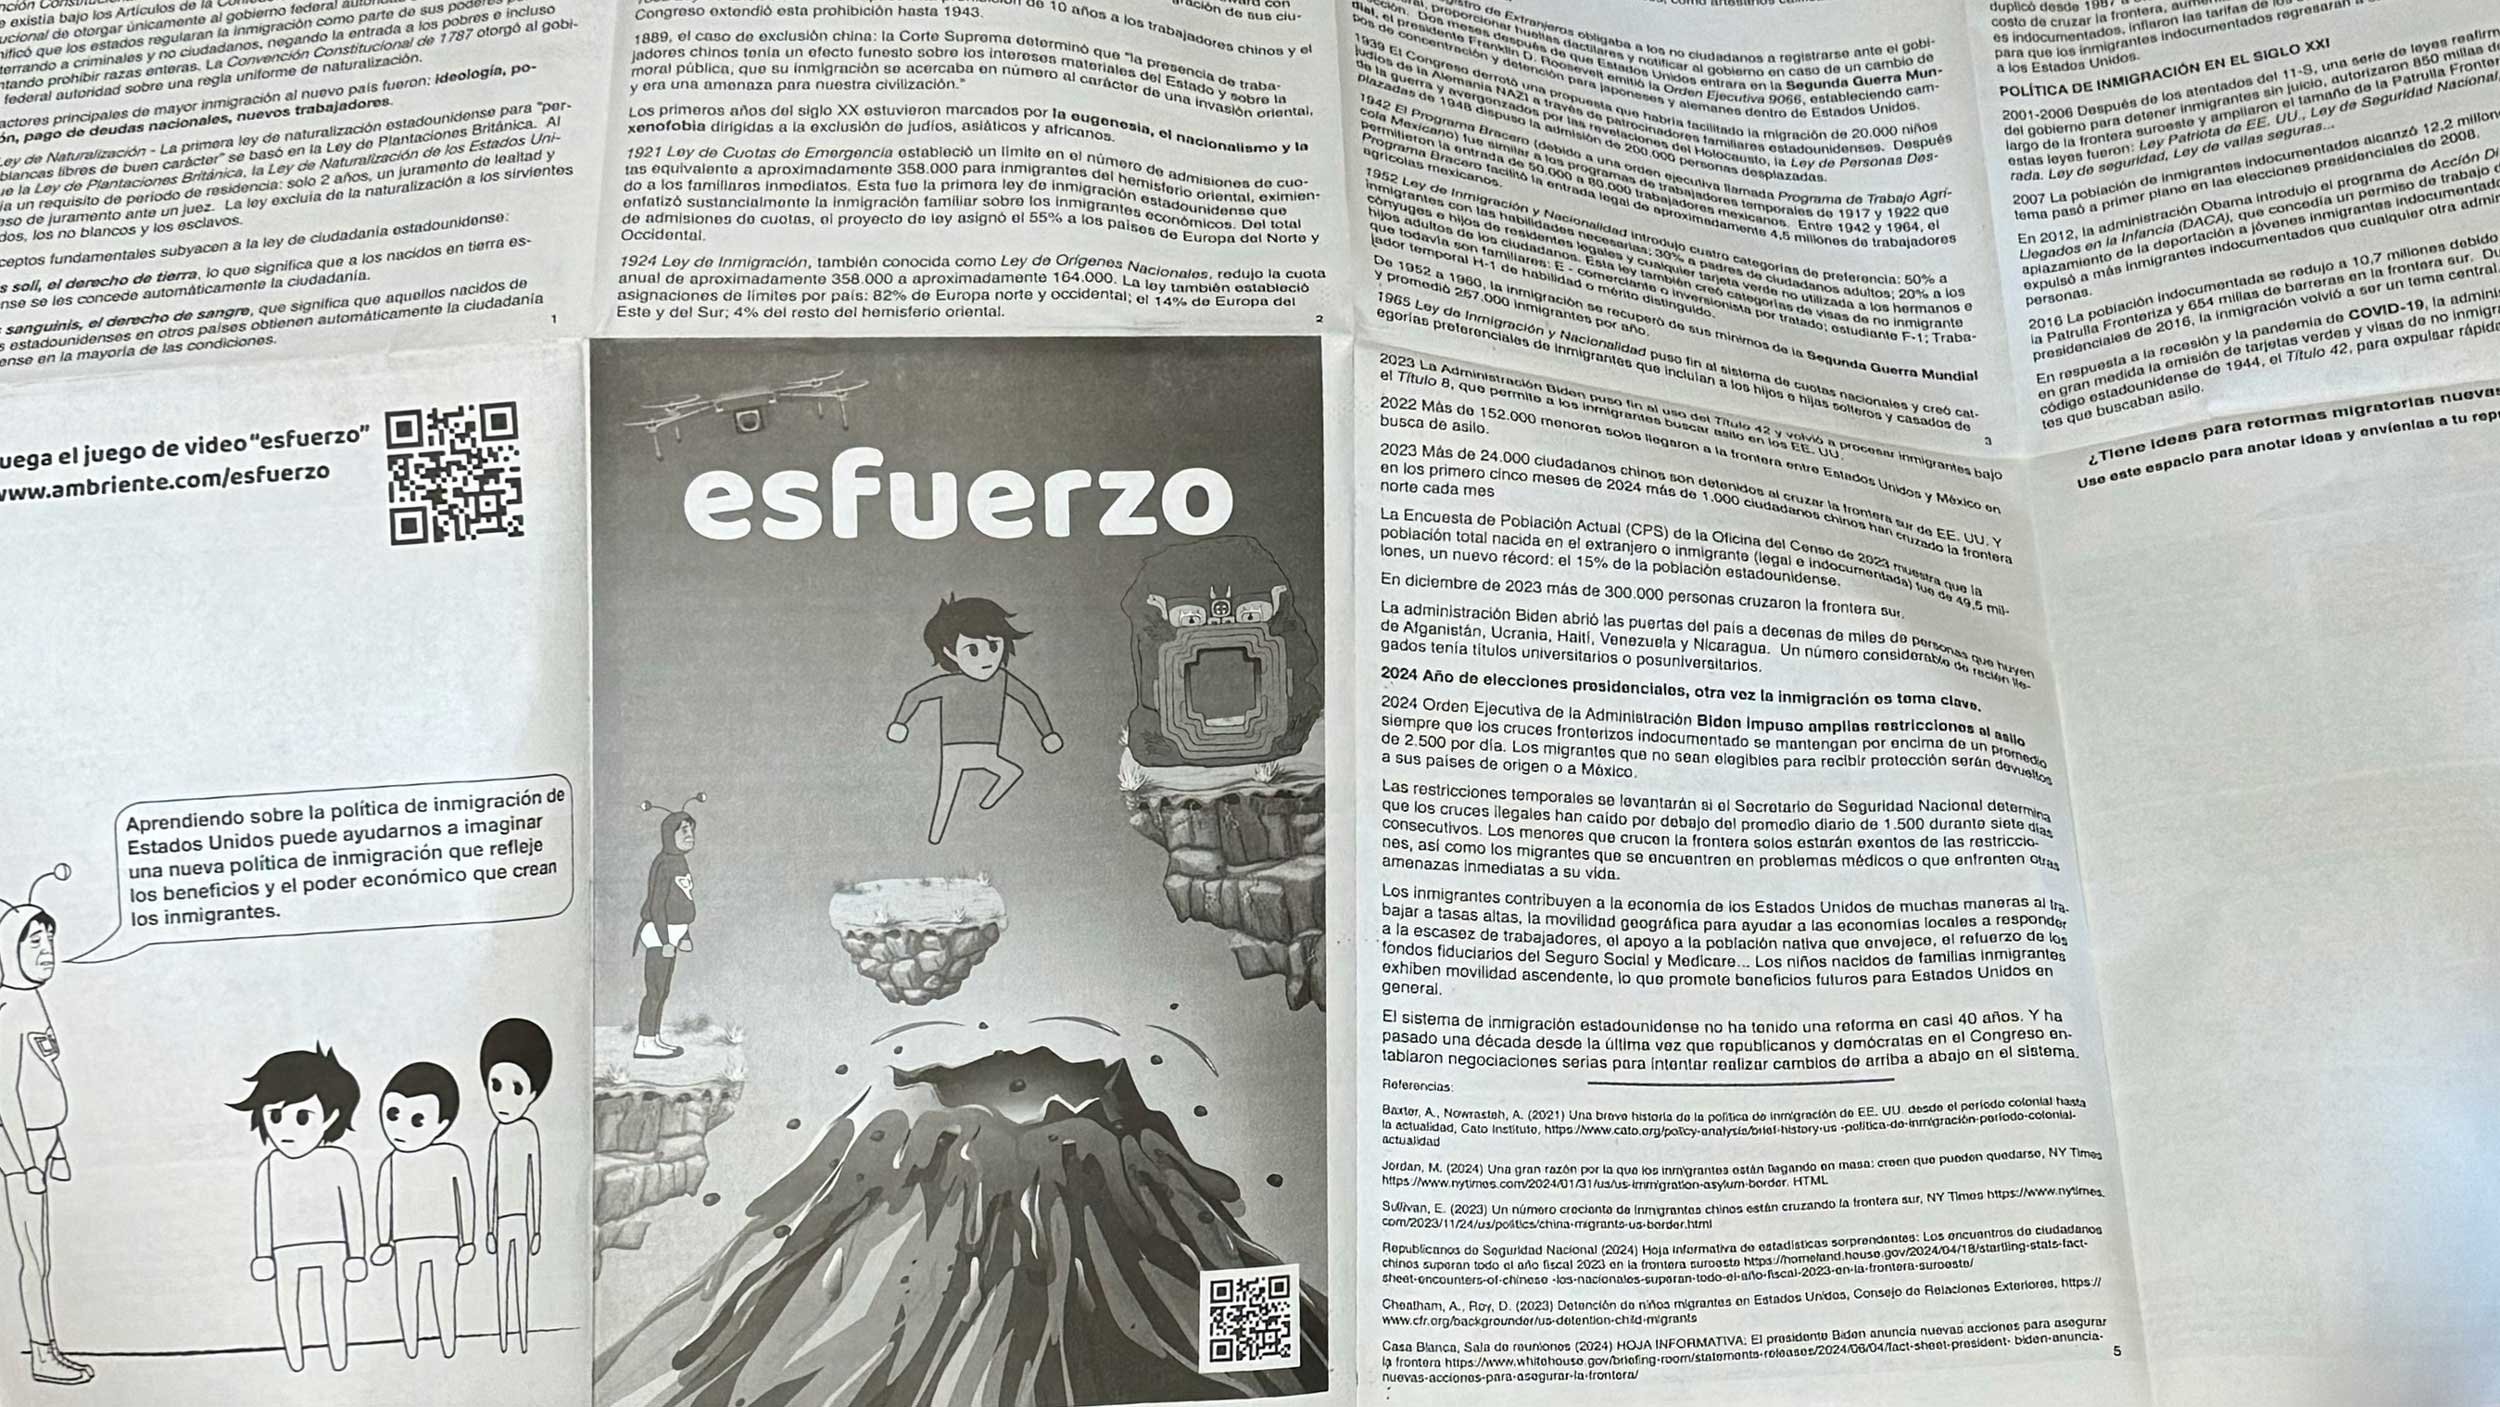 Photo of newspaper print for the U.S. immigration policy project titled esfuerzo